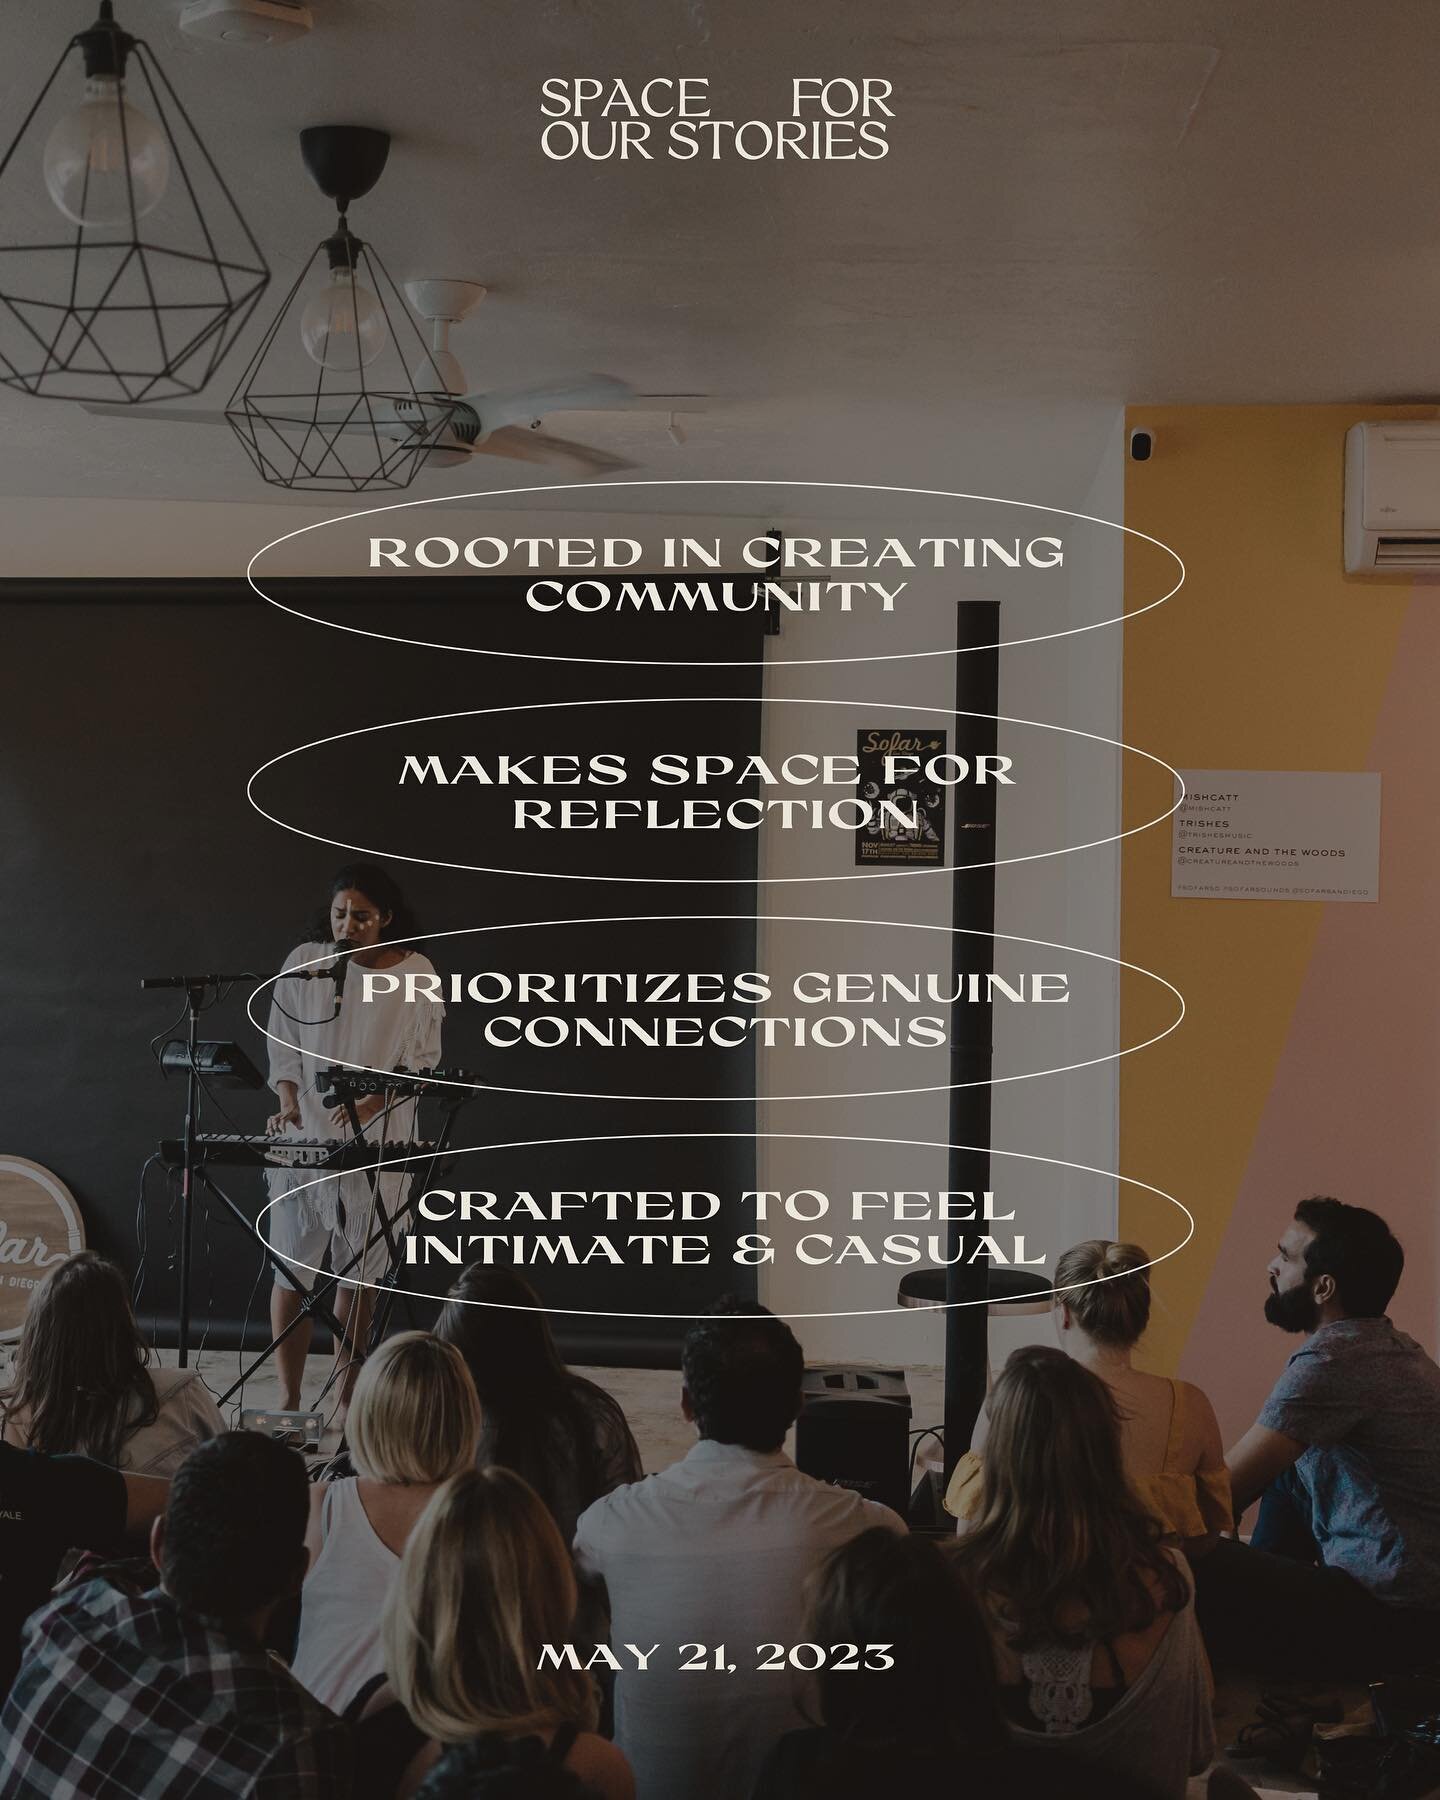 ✨ What to expect at our Space for Our Stories event? ✨

⁕ An IRL experience rooted in community 
⁕ Space for reflection and self-discovery
⁕ Prioritizing genuine connections &amp; soulful conversations
⁕ Designed to feel intimate and casual without a